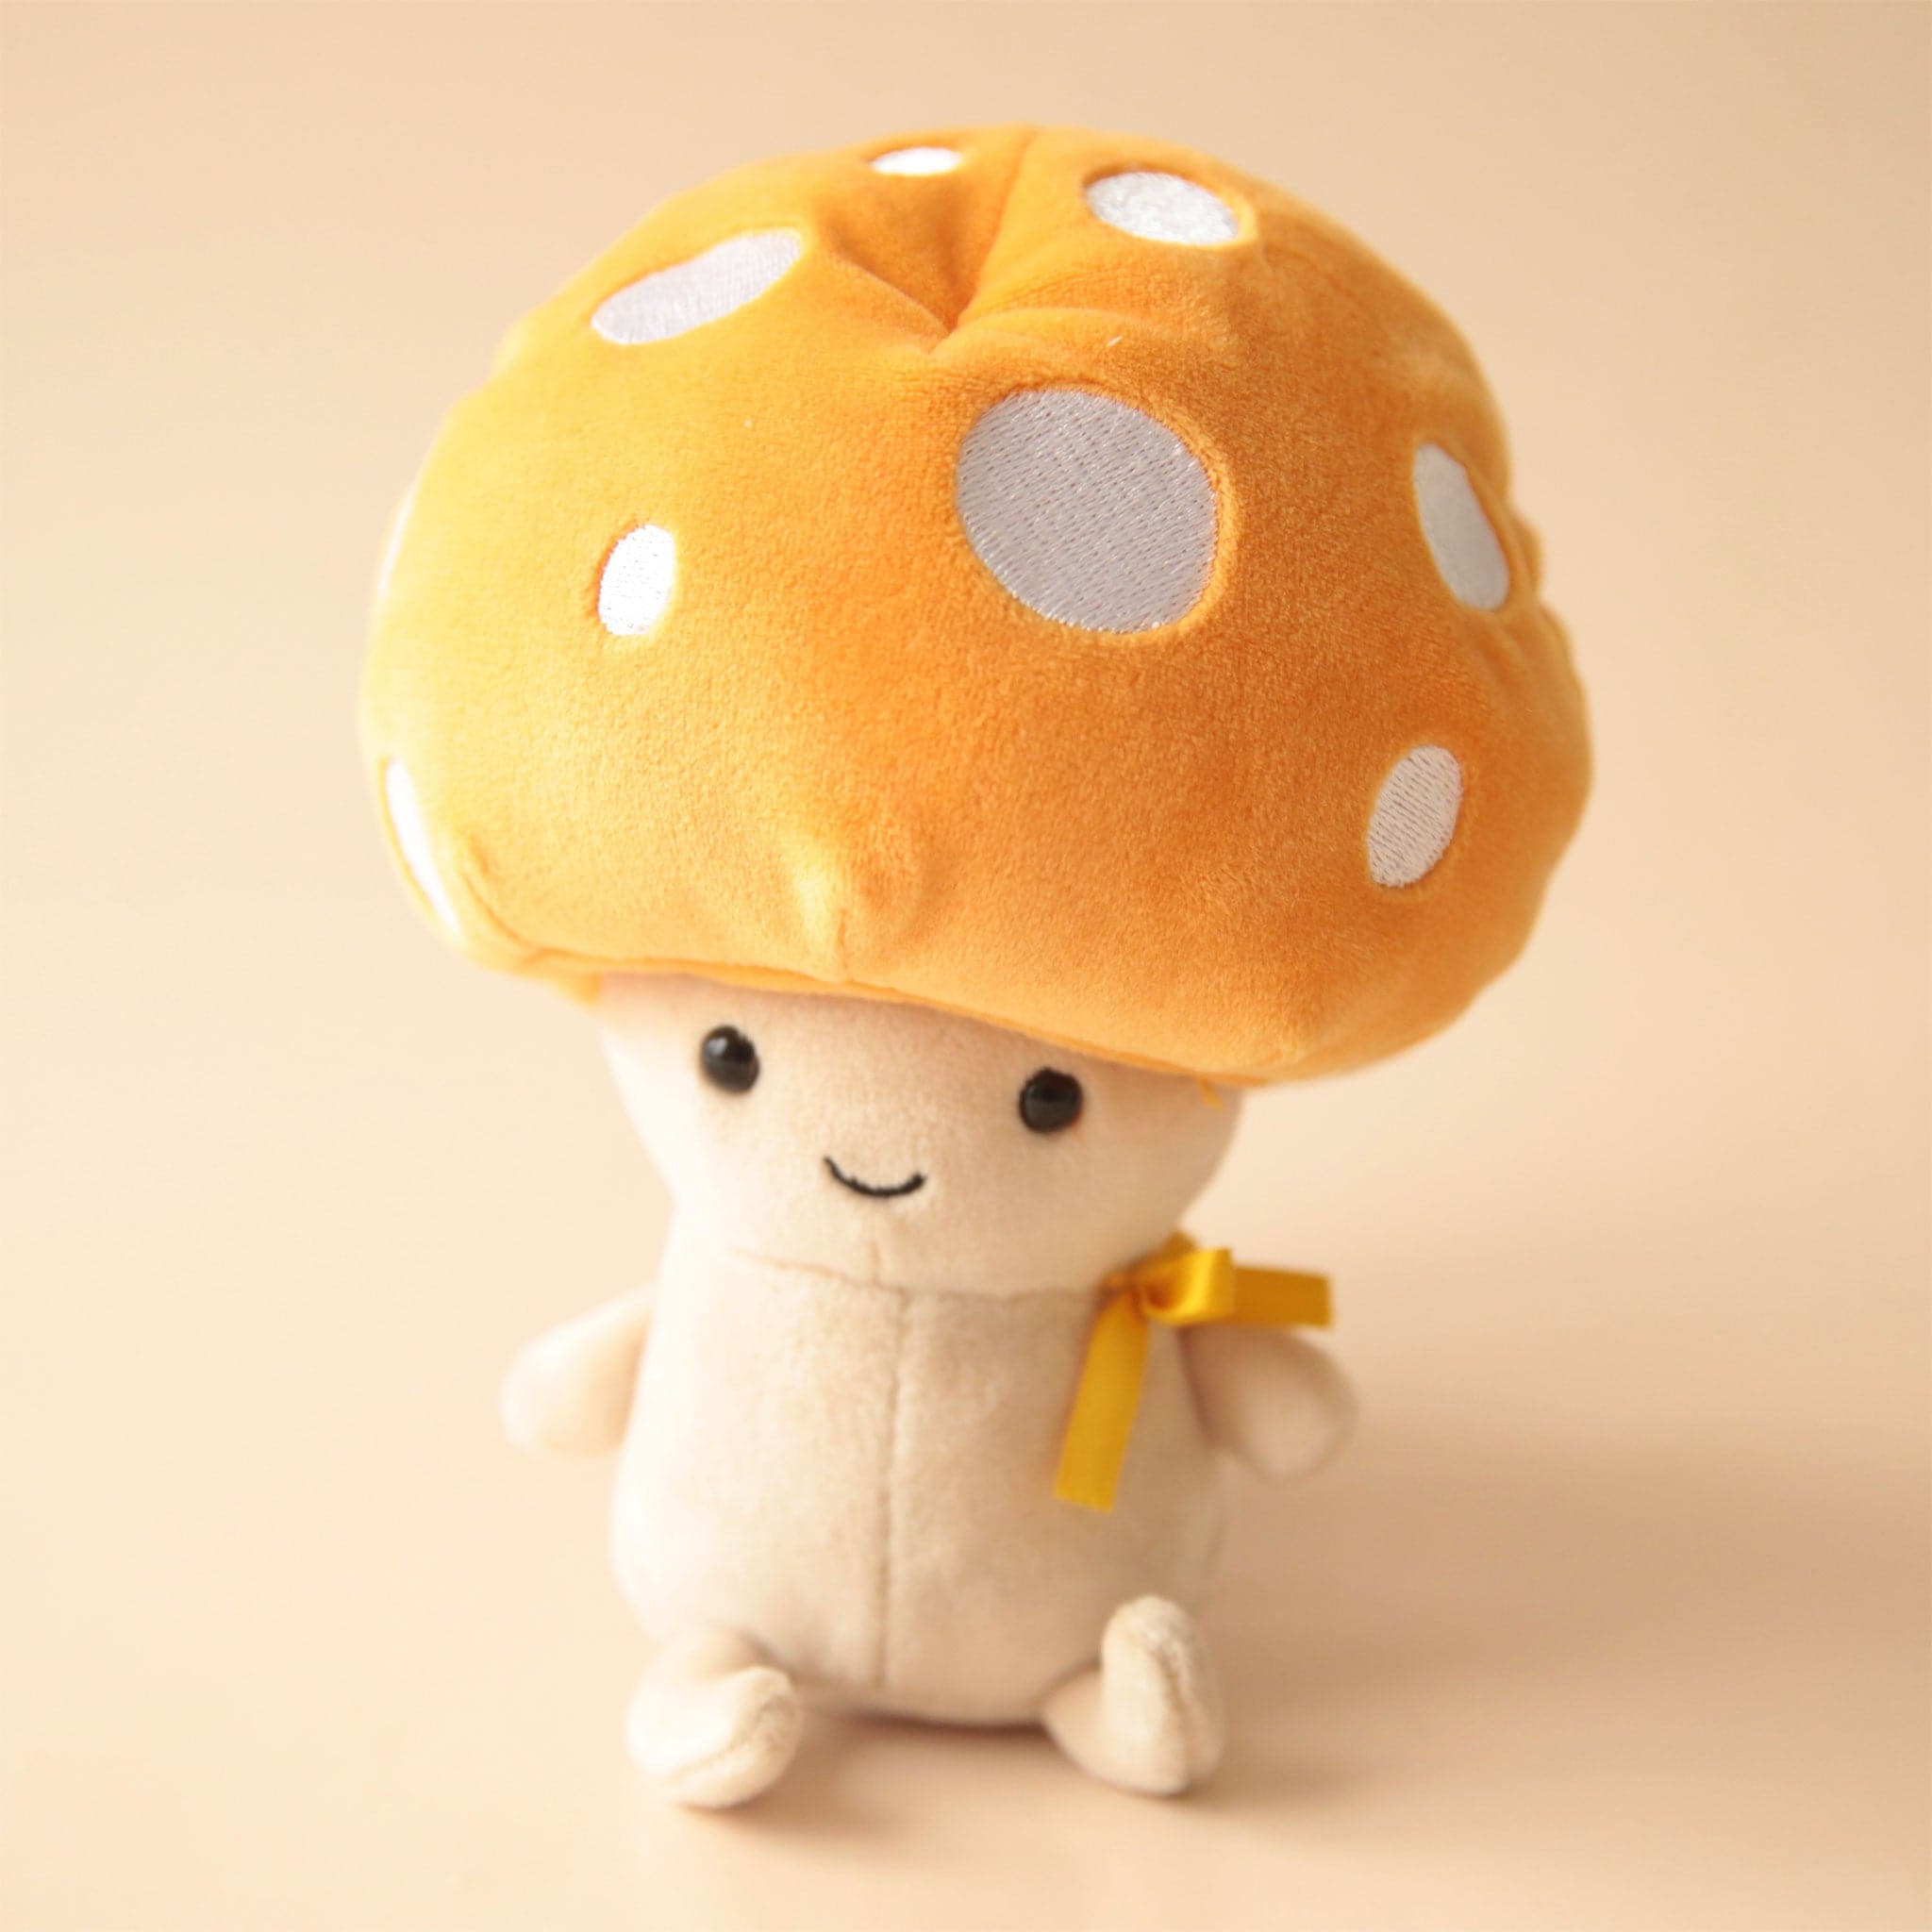 A sweet cuddling mushroom guy with a yellow and white spotted top and cream body.